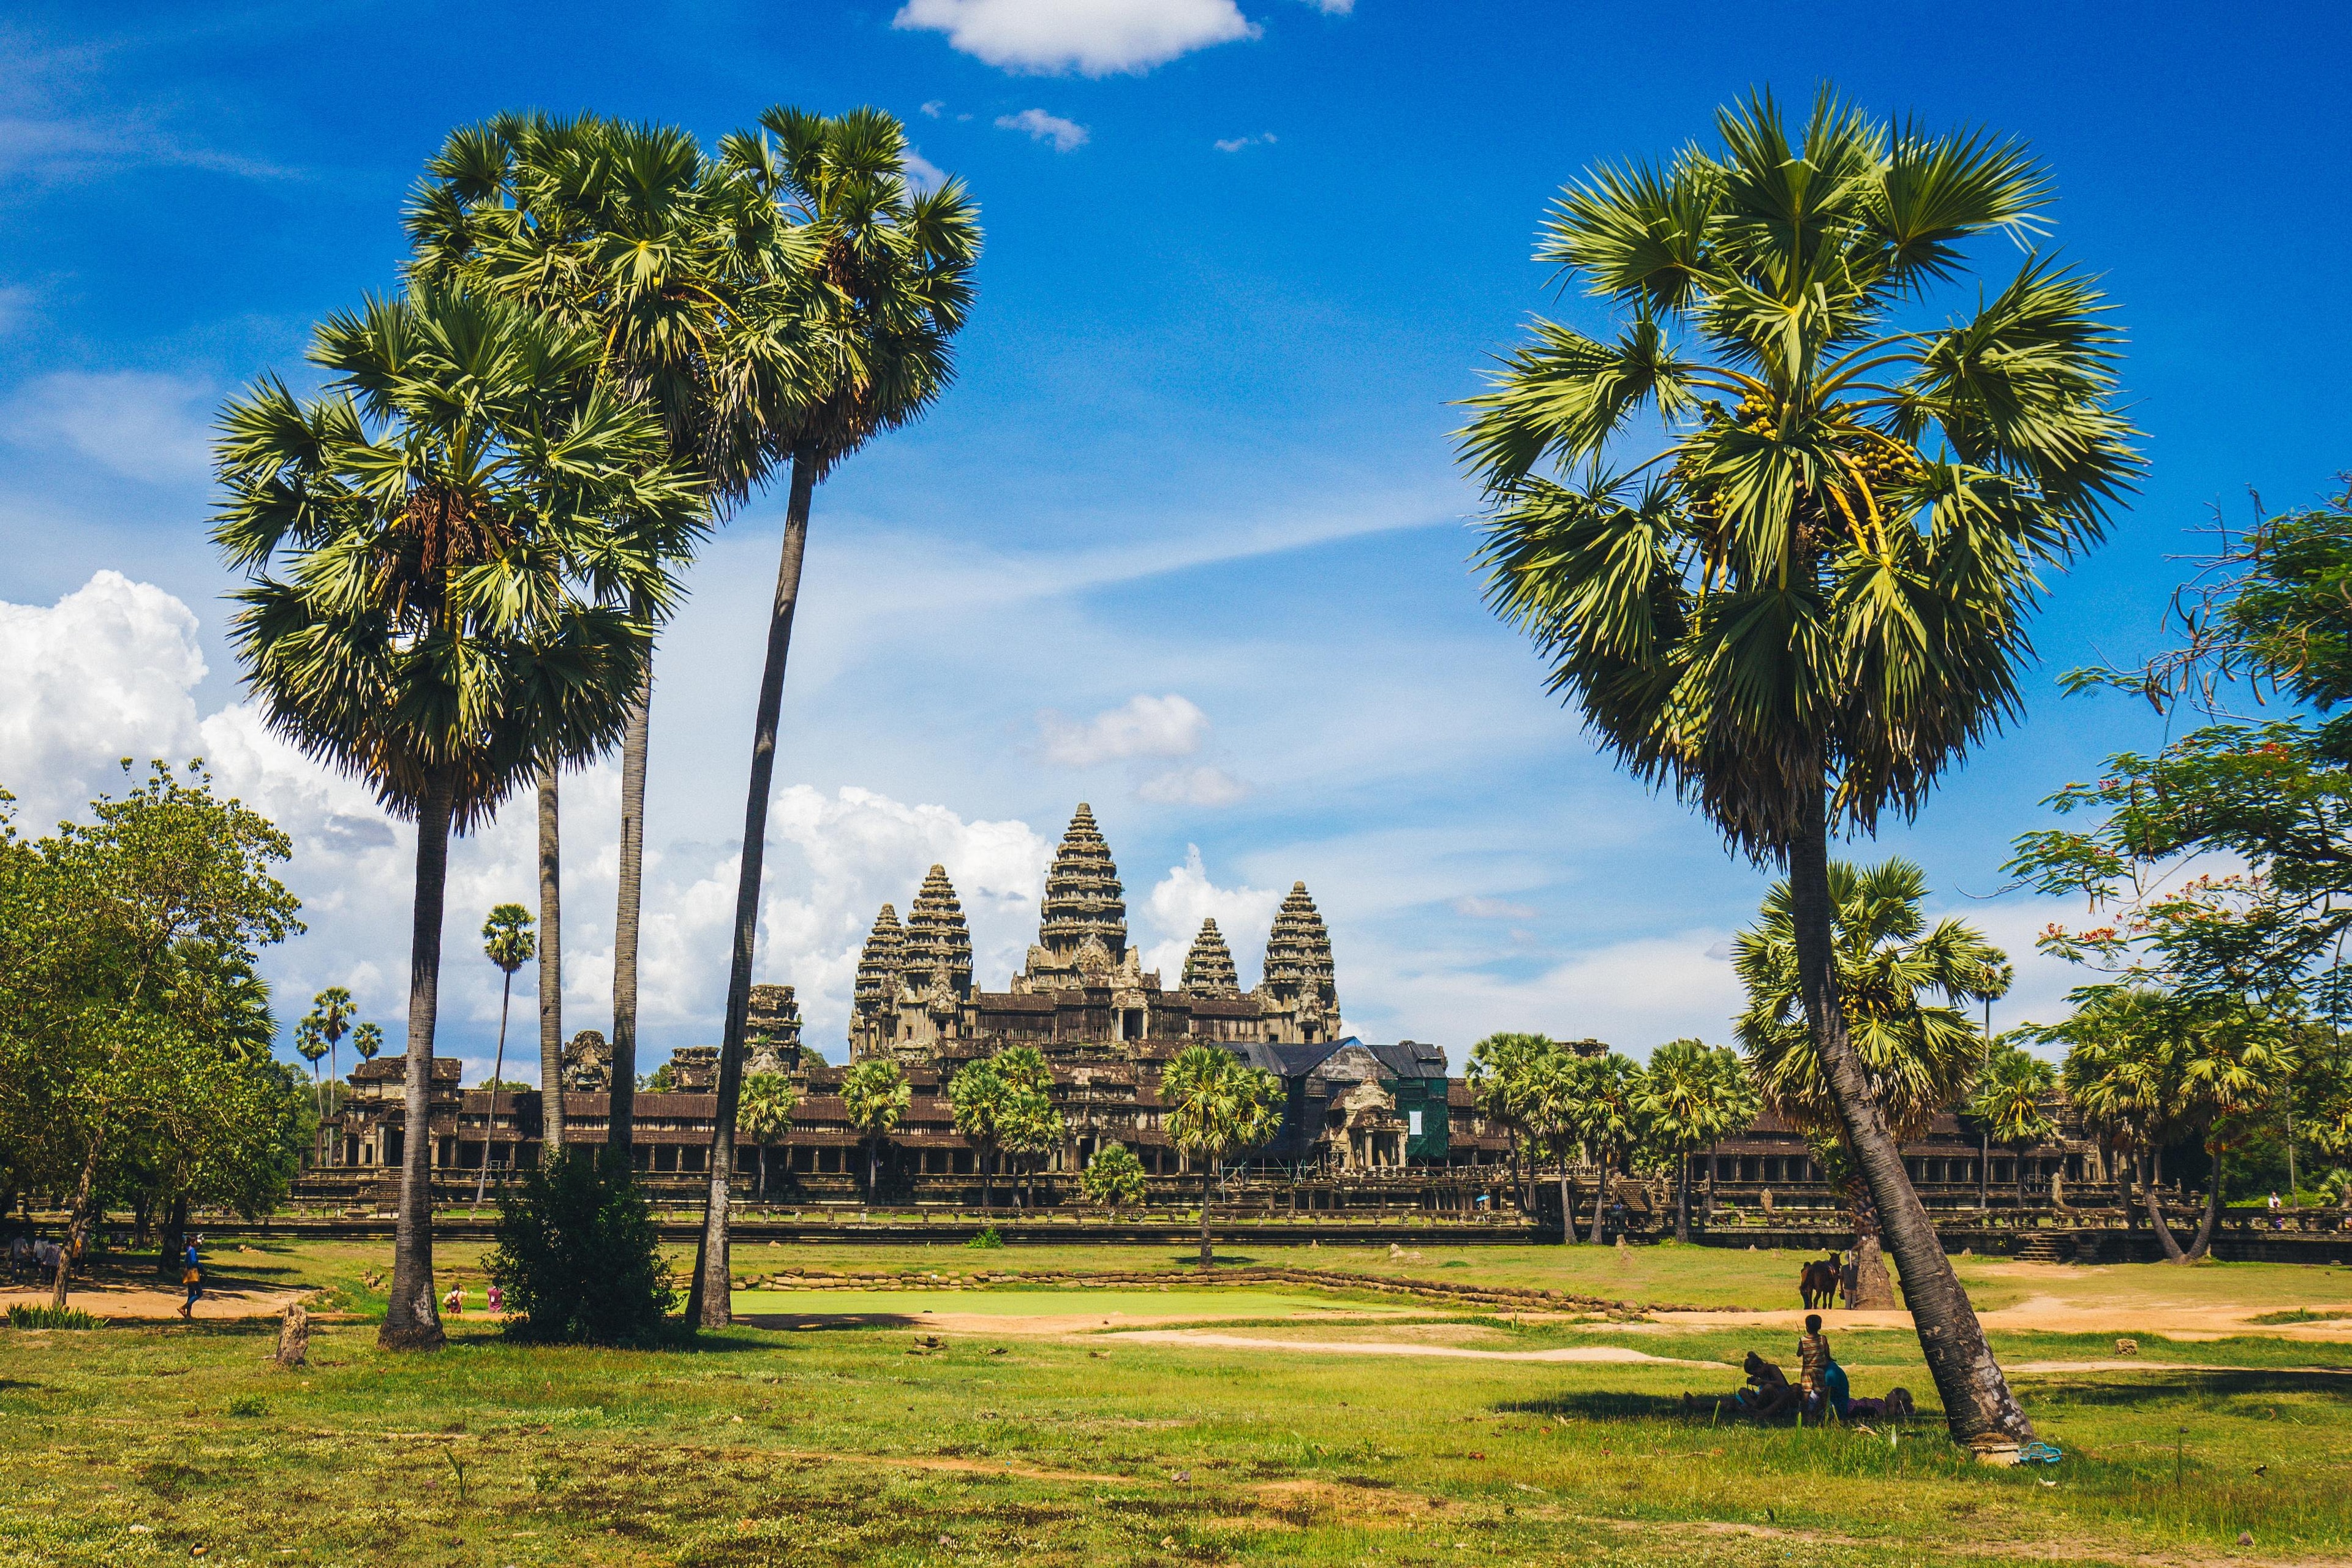 10 Temples in Cambodia with Ancient Architecture